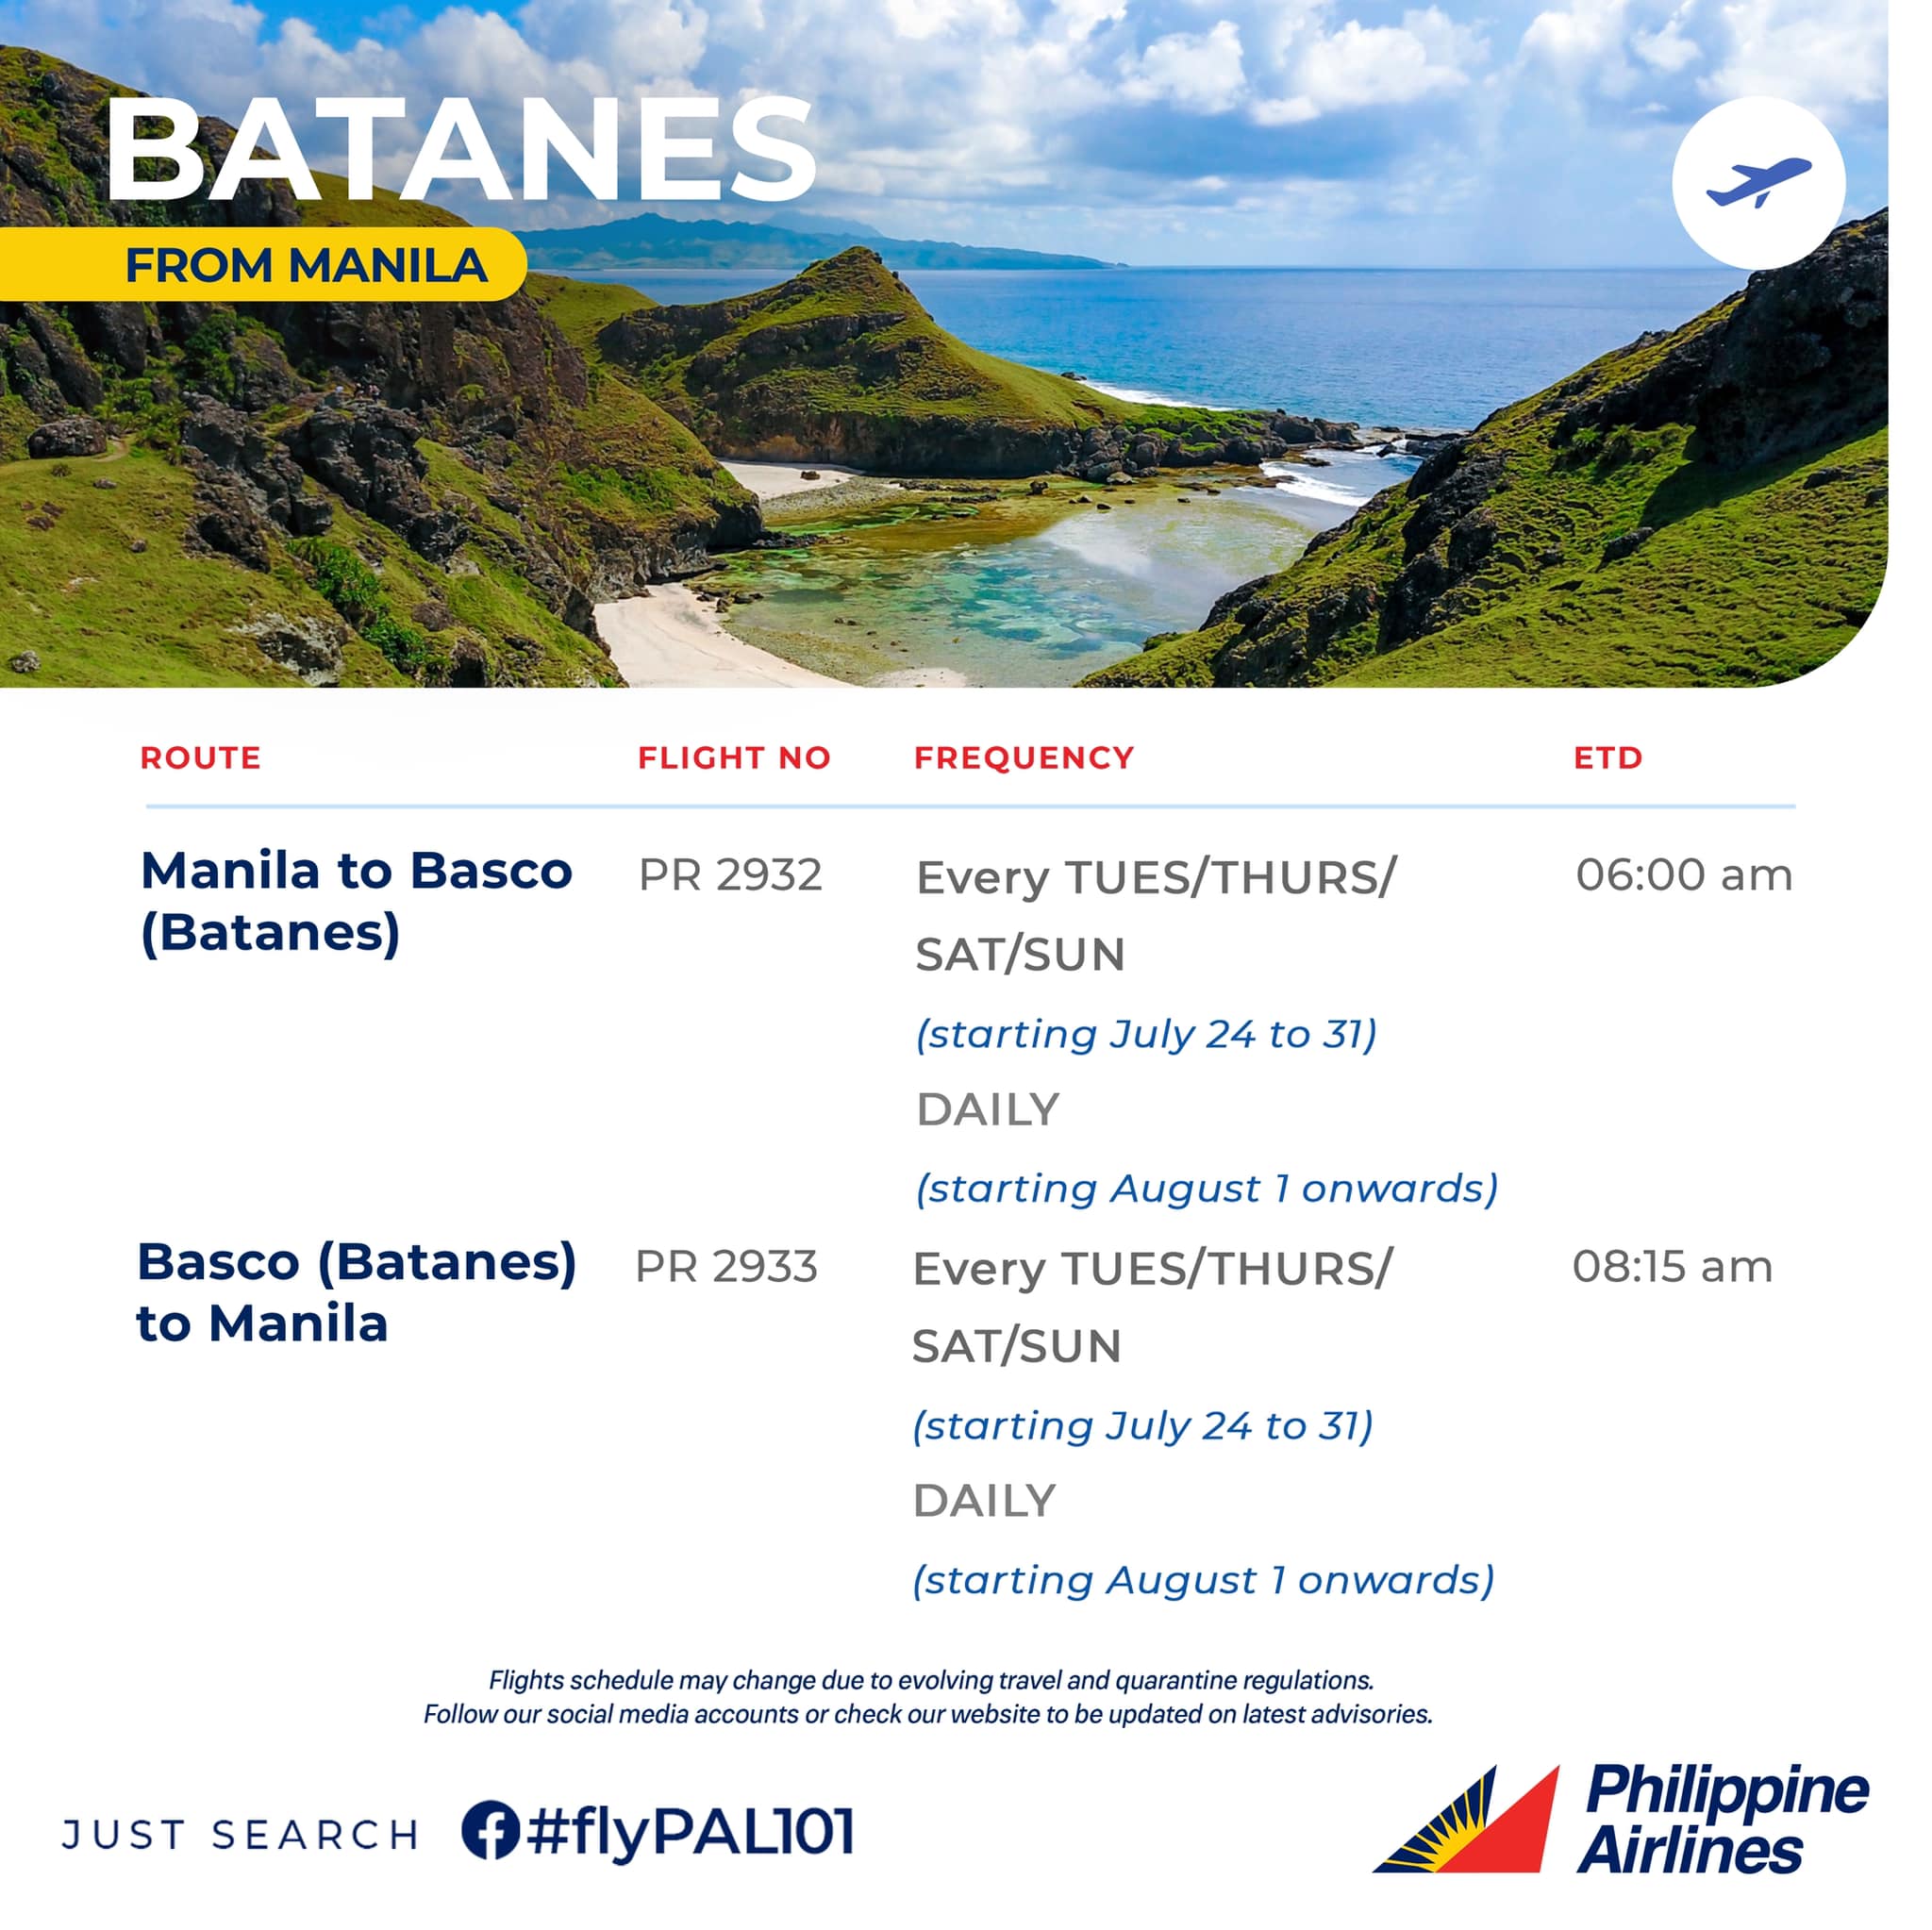 Starting August 1, 2022, we will operate daily flights to Batanes